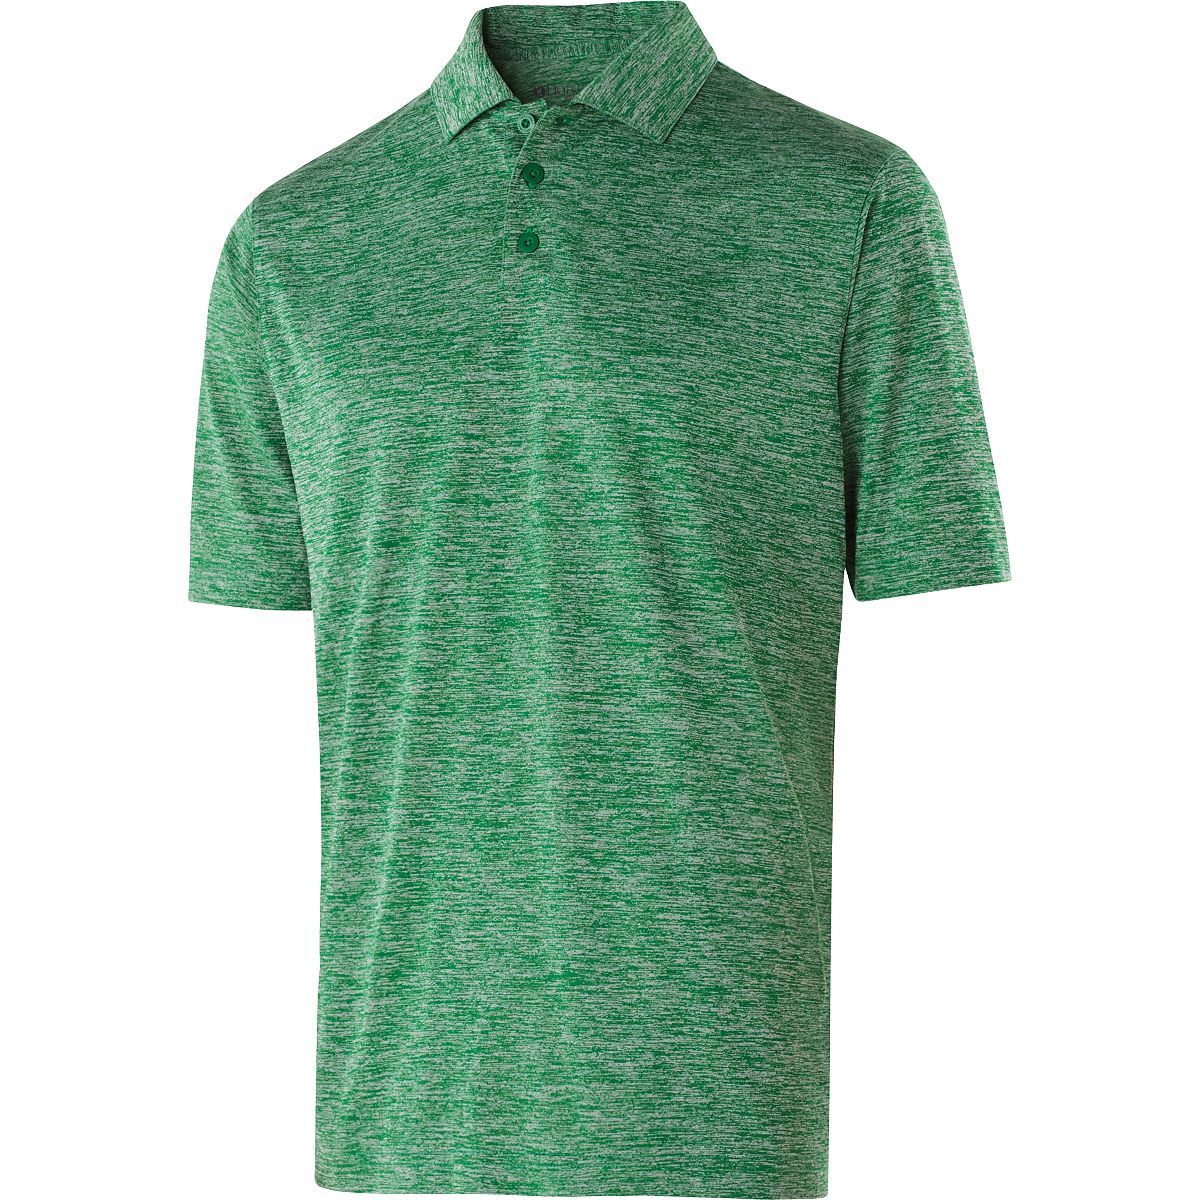 Holloway Electrify 2.0 Polo in Kelly Heather  -Part of the Adult, Adult-Polos, Polos, Holloway, Shirts product lines at KanaleyCreations.com